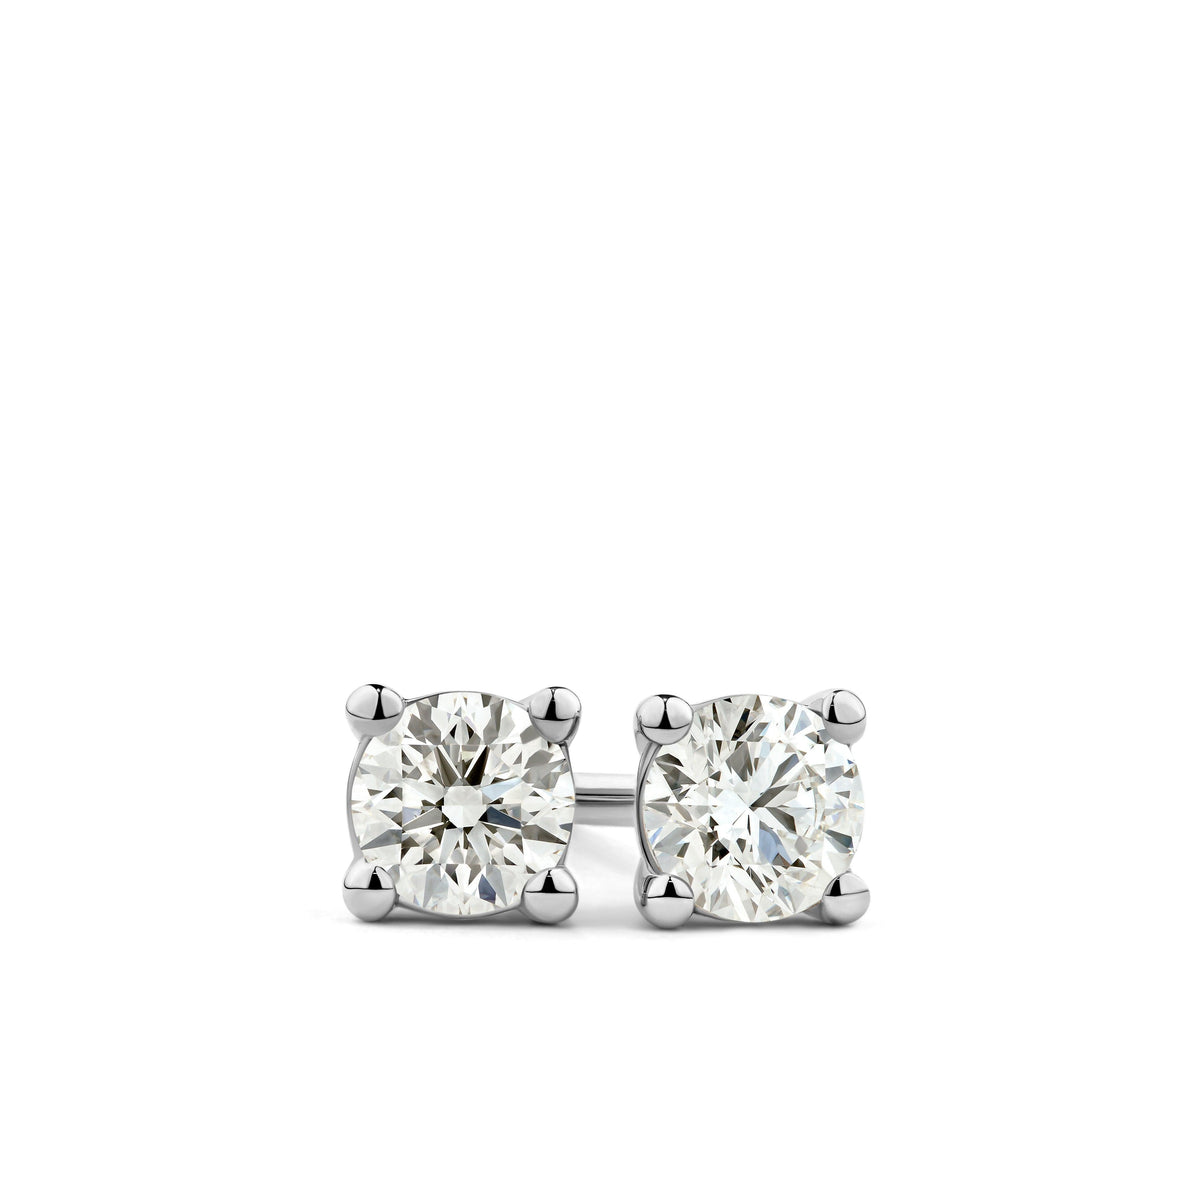 Rendition Solitaire Earrings in 9ct White Gold - Wallace Bishop